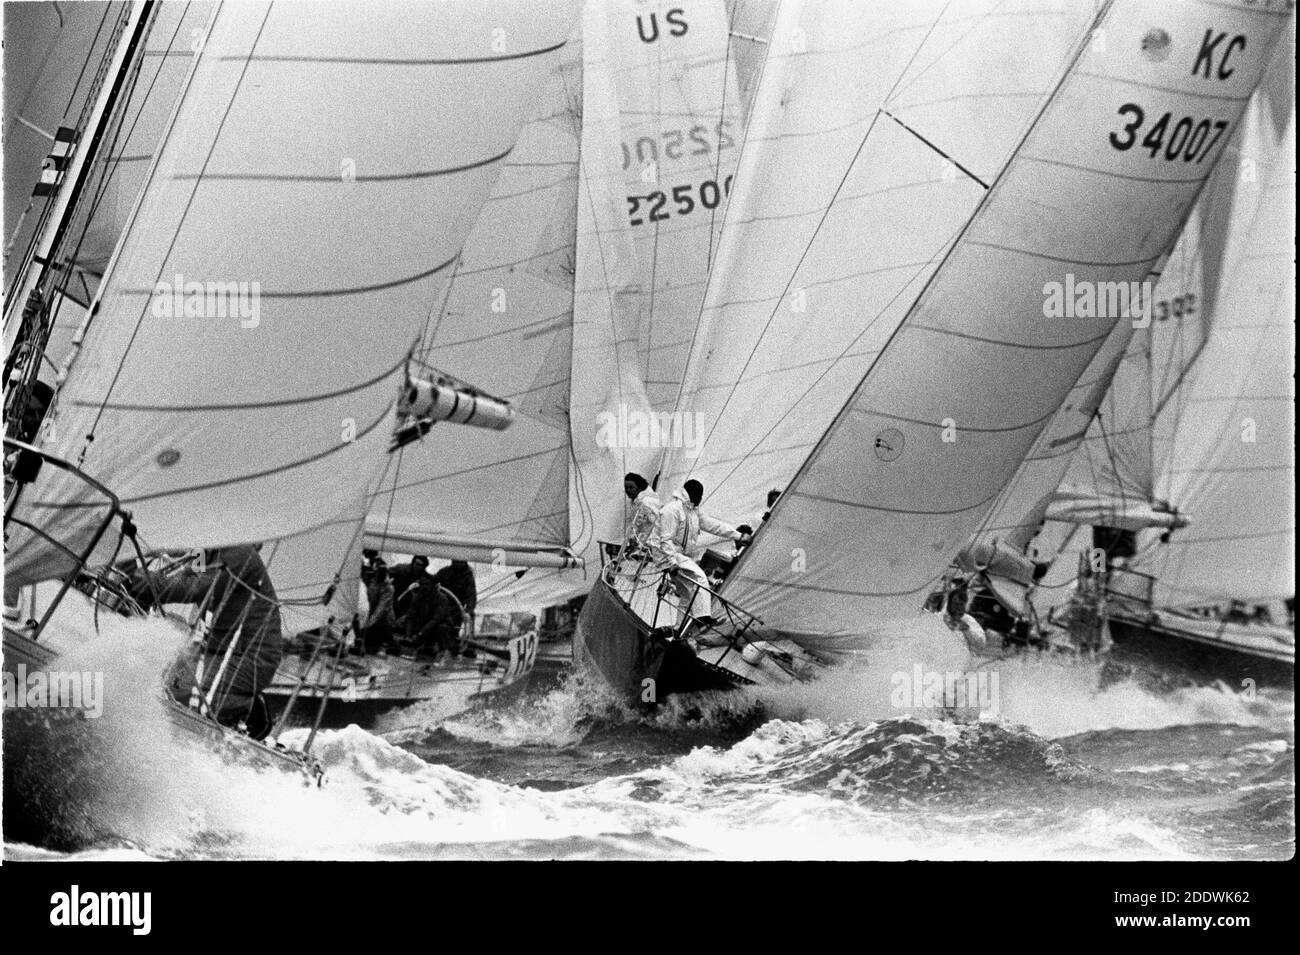 AJAXNETPHOTO. JULY,1979. COWES, ENGLAND. - ADMIRAL'S CUP -  START OF THE FIRST INSHORE RACE ON THE ROYAL YACHT SQUADRON LINE OFF COWES. PHOTO:JONATHAN EASTLAND/AJAX REF:7902081 Stock Photo